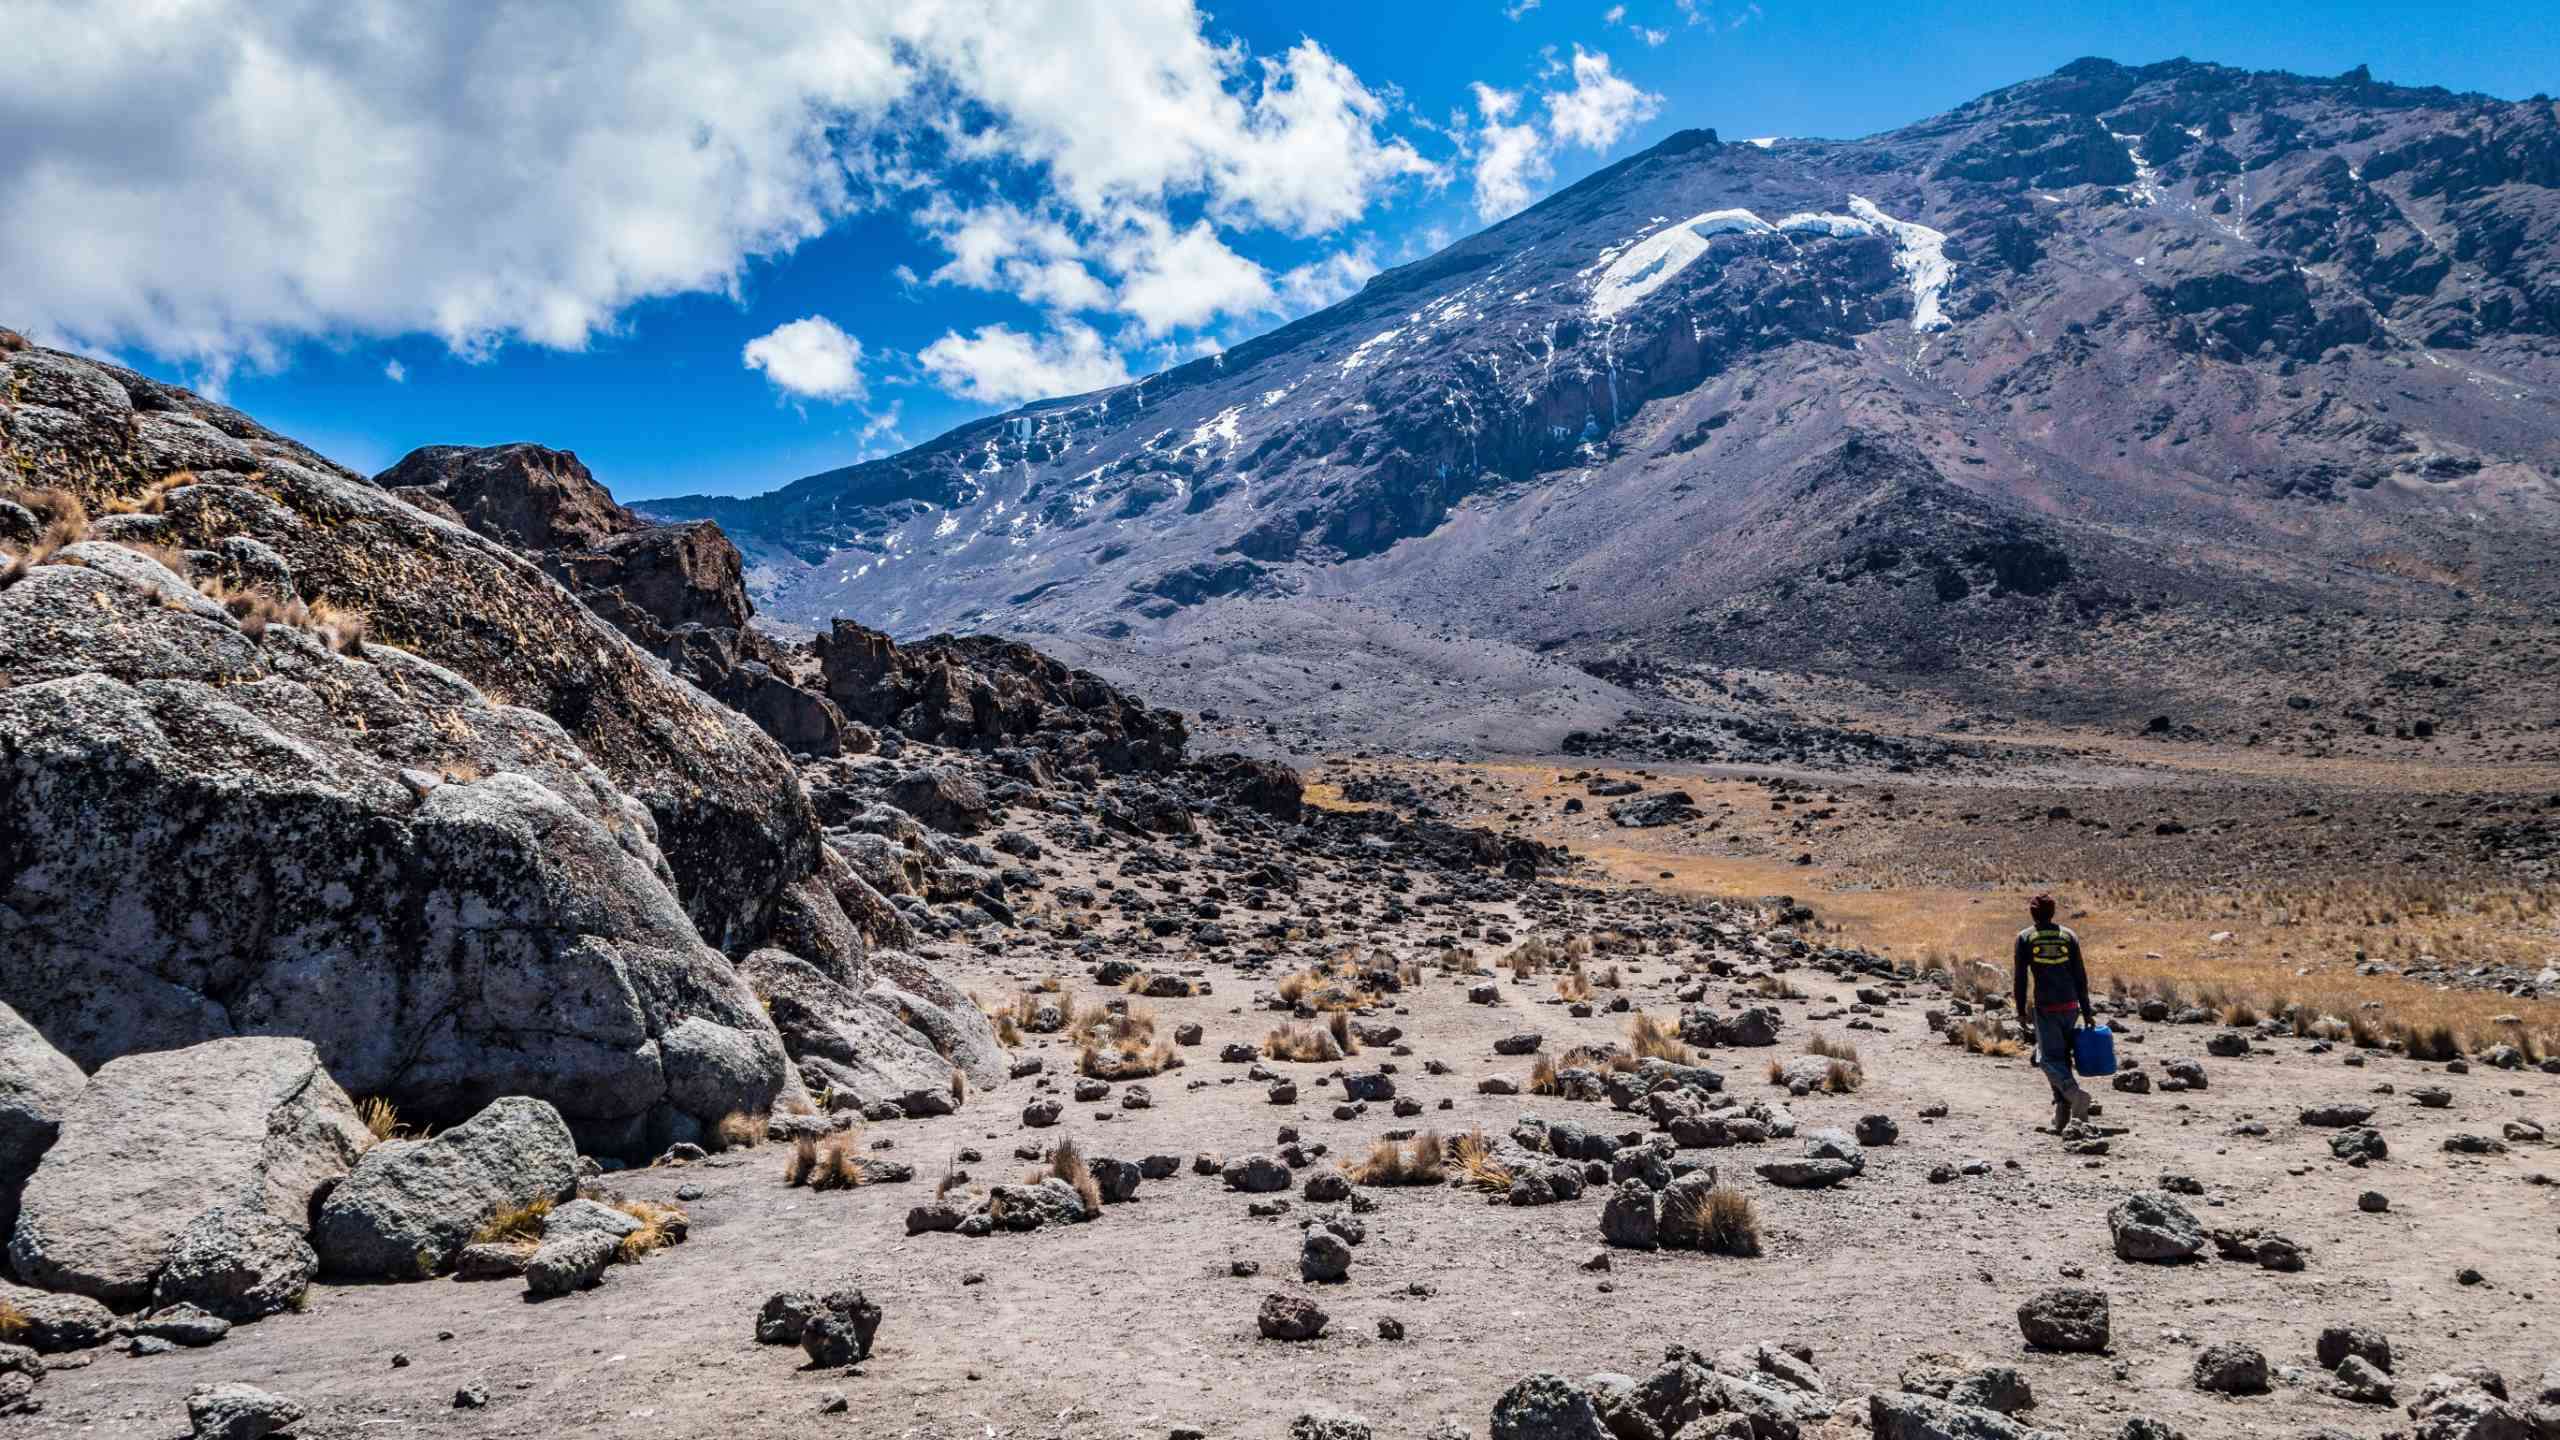 Classic Mount Kilimanjaro Ascent 8D7N (Rongai Route), Fully Guided